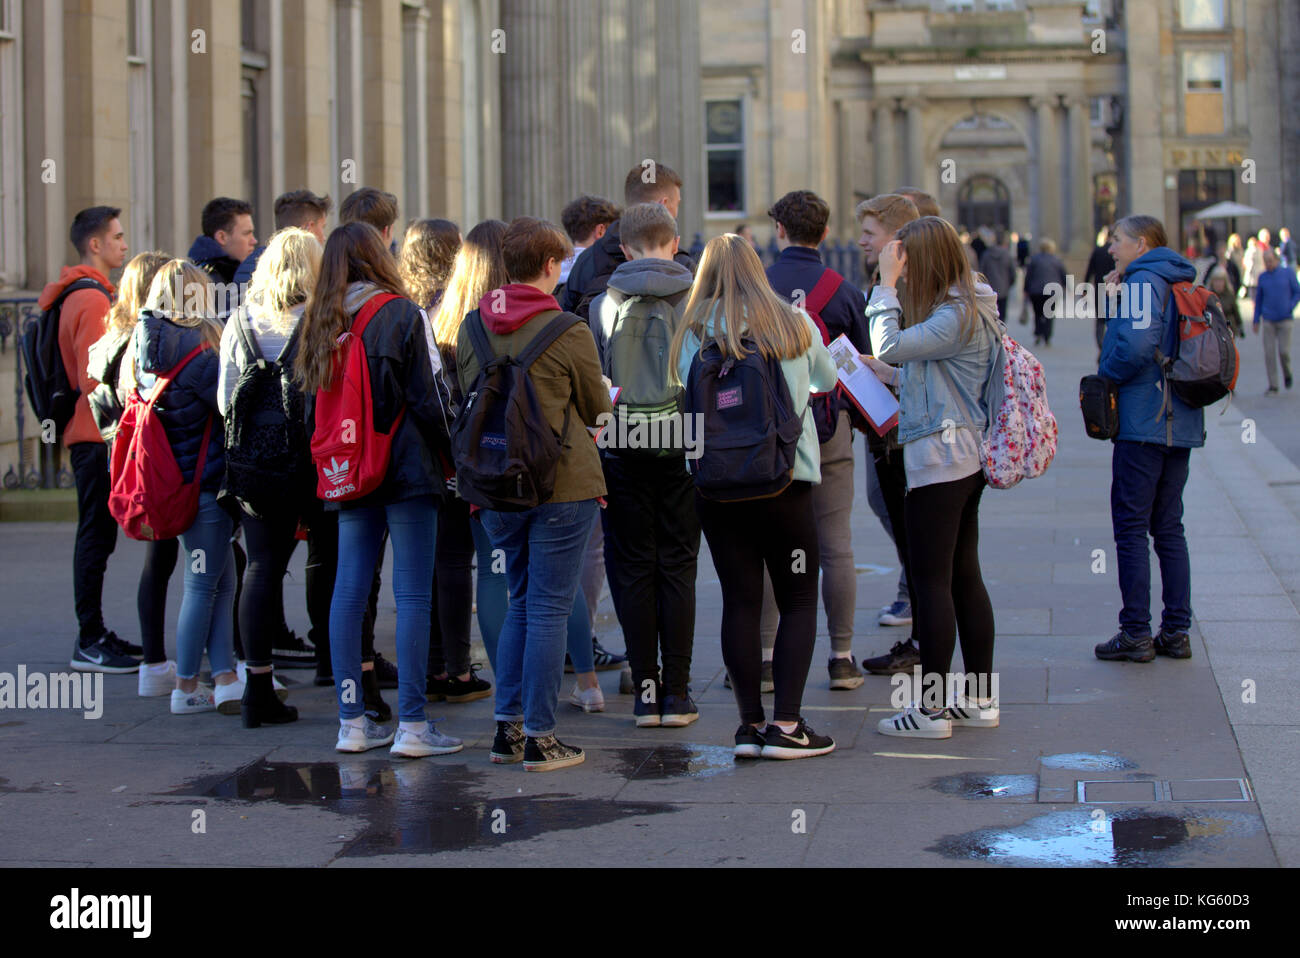 large group of schoolchildren  foreign students on street together viewed from behind in royal exchange square goma Stock Photo